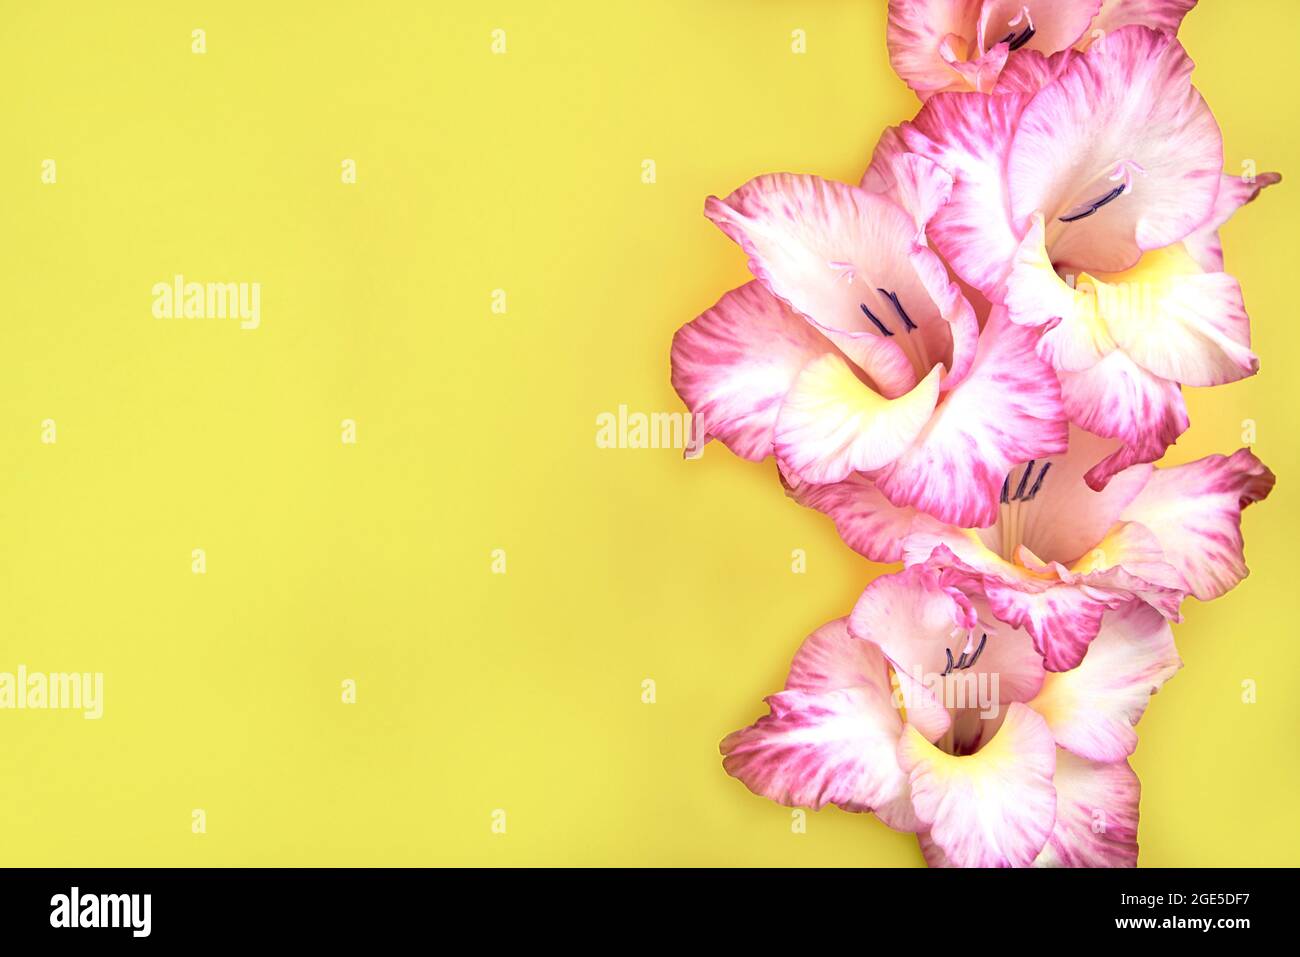 White-pink delicate gladiolus flowers on a yellow background, copy space. Stock Photo